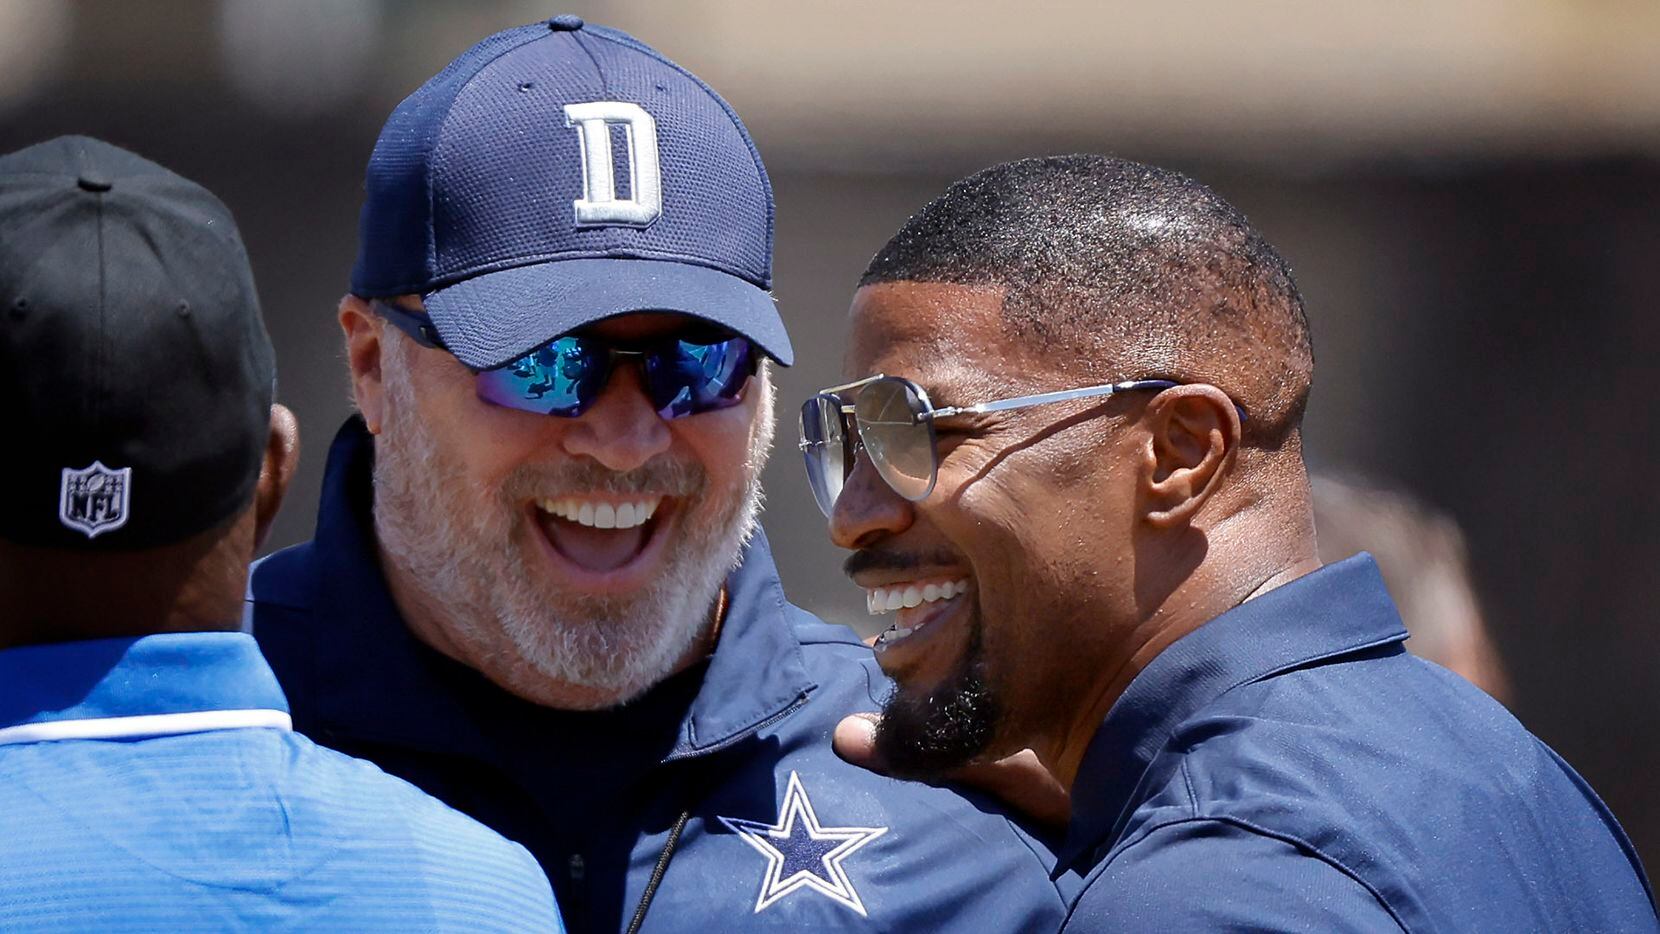 Dallas Cowboys head coach Mike McCarthy visits with actor and fan Jaime Foxx following...